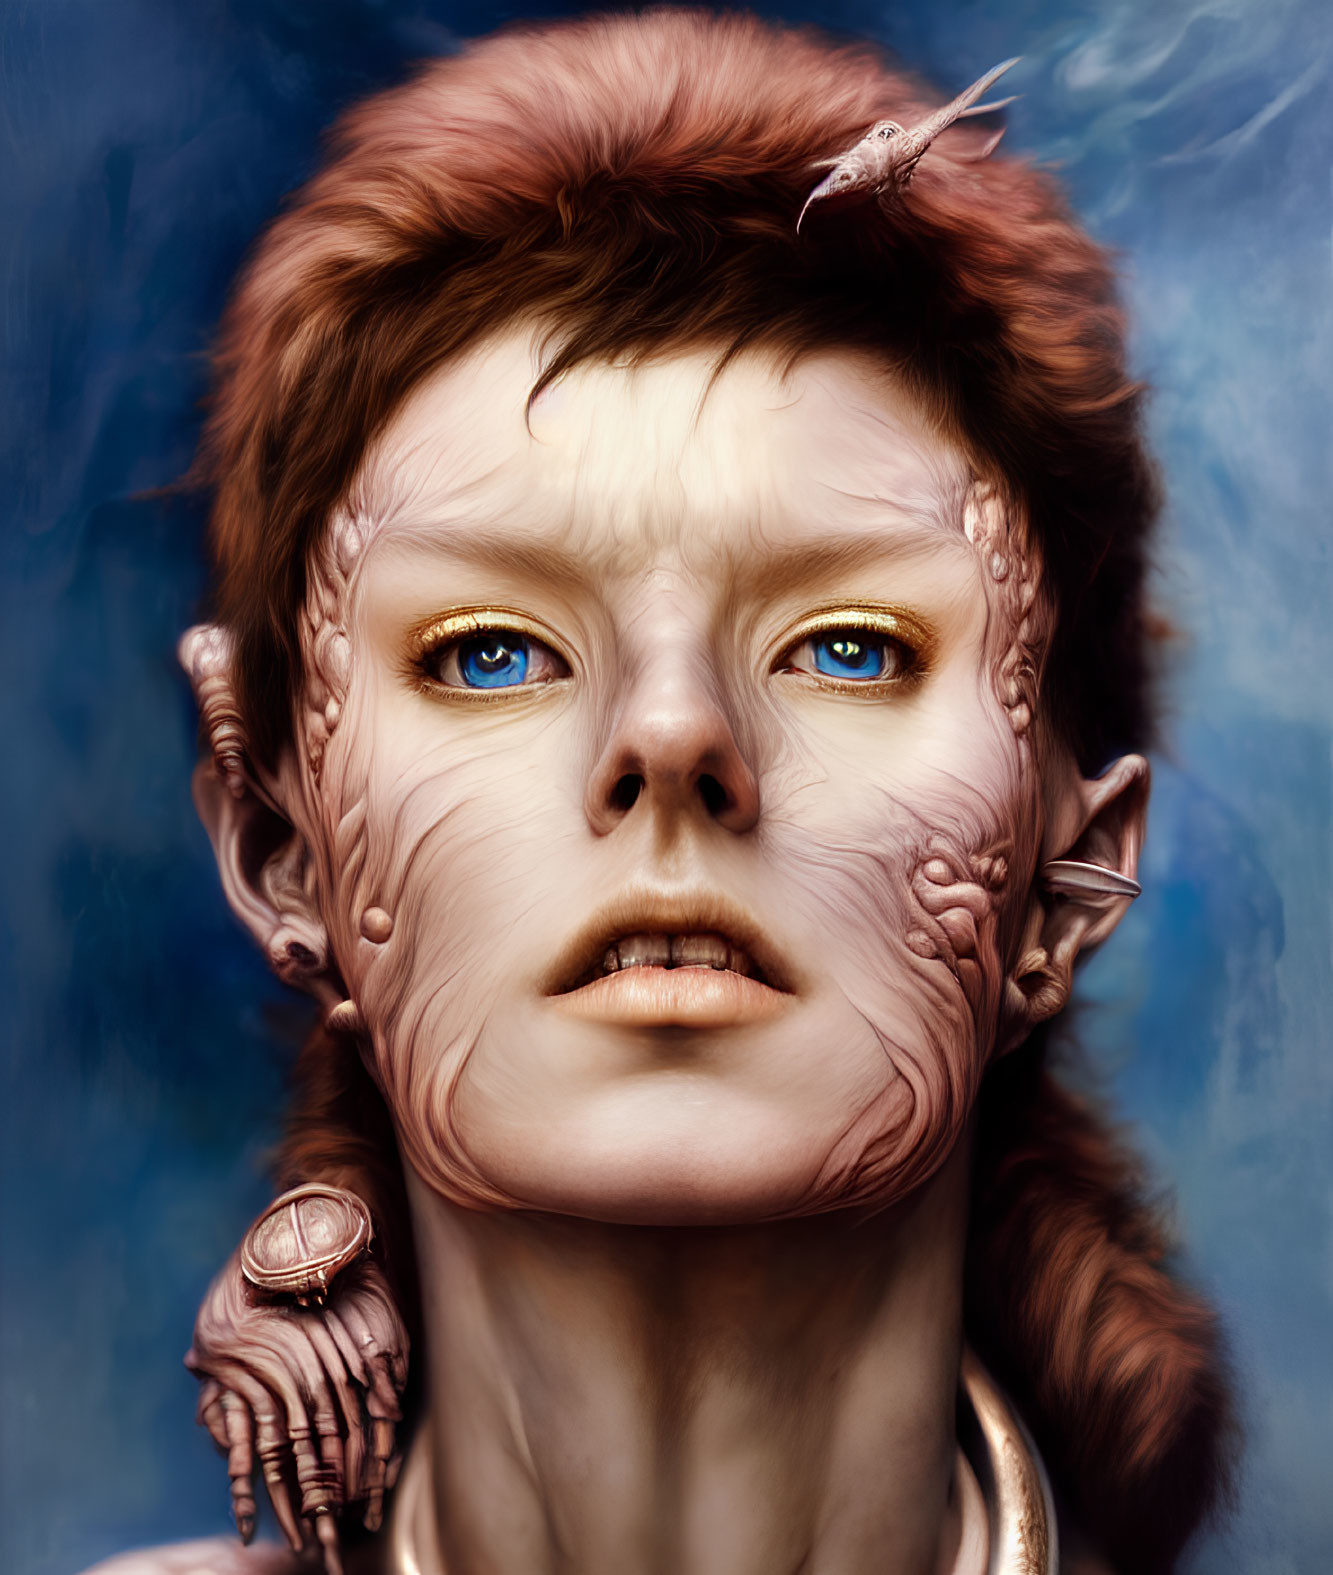 Fantastical portrait of being with blue eyes, pointed ears, textured skin, ornate jewelry,